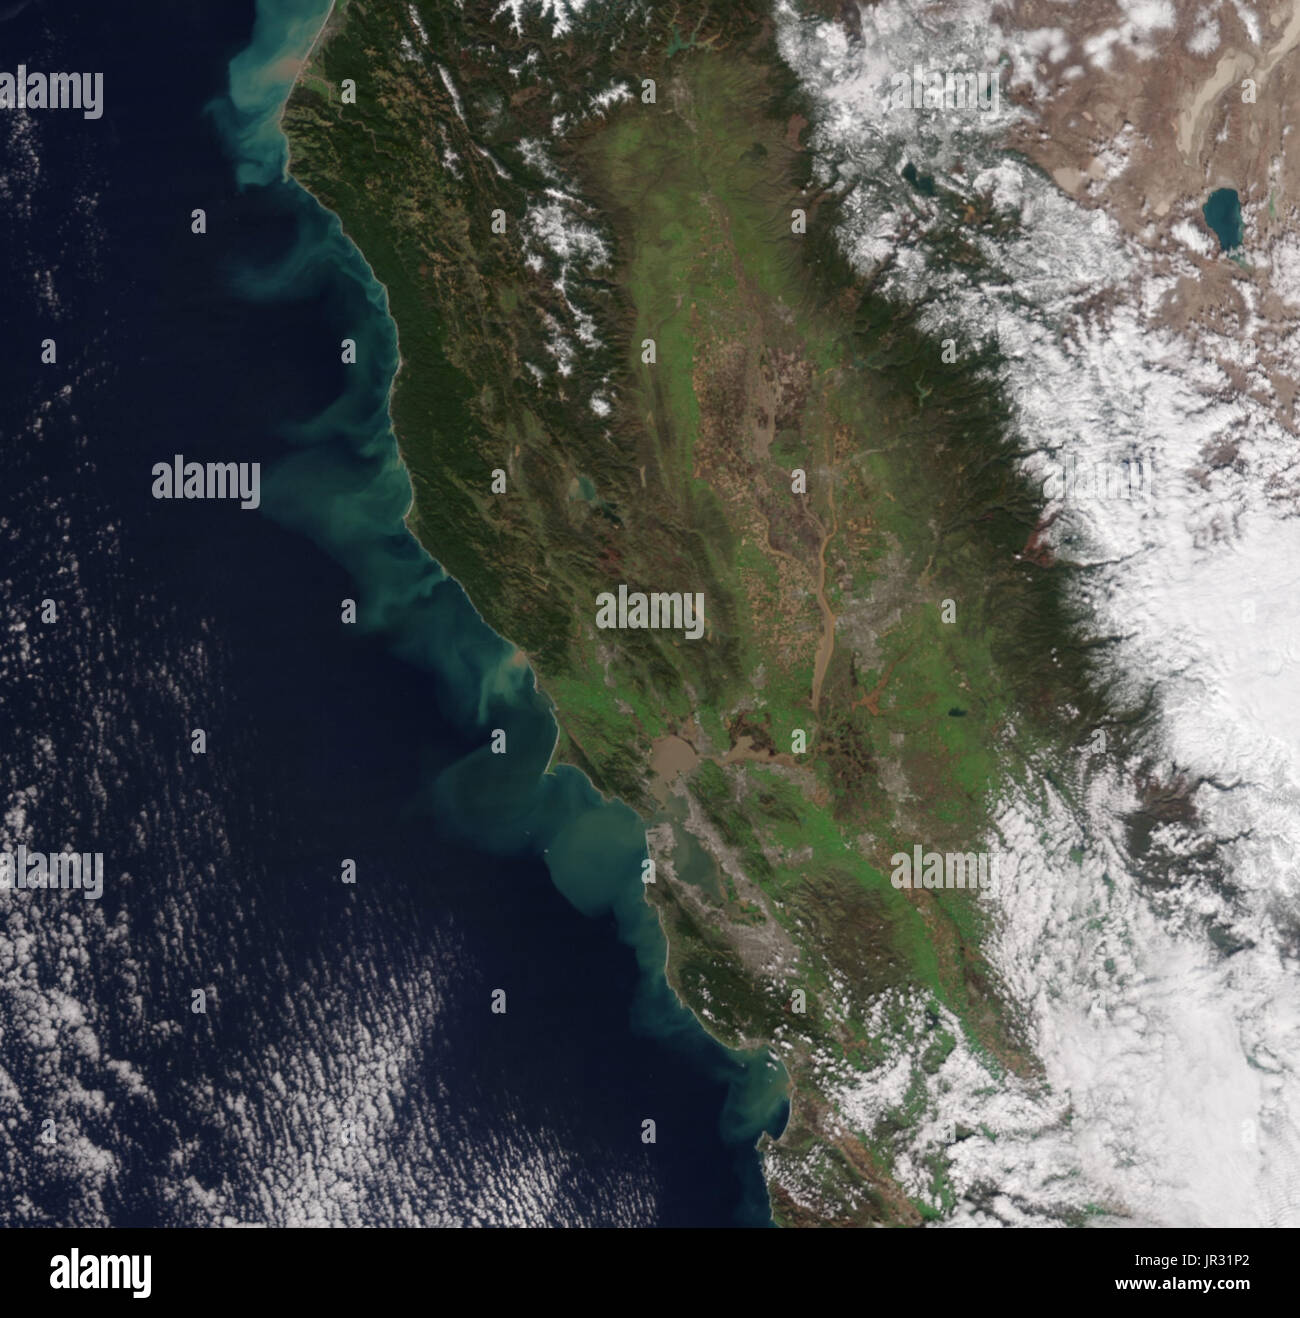 California coast on February 11, 2017, after a series of winter storms, as seen by the Visible Infrared Imaging Radiometer Suite (VIIRS) on the Suomi NPP satellite. Reservoirs are full, and overflowing rivers carry muddy sediment to the Pacific Ocean. Compare with JG5743, taken in November, 2016, before the rain. Stock Photo